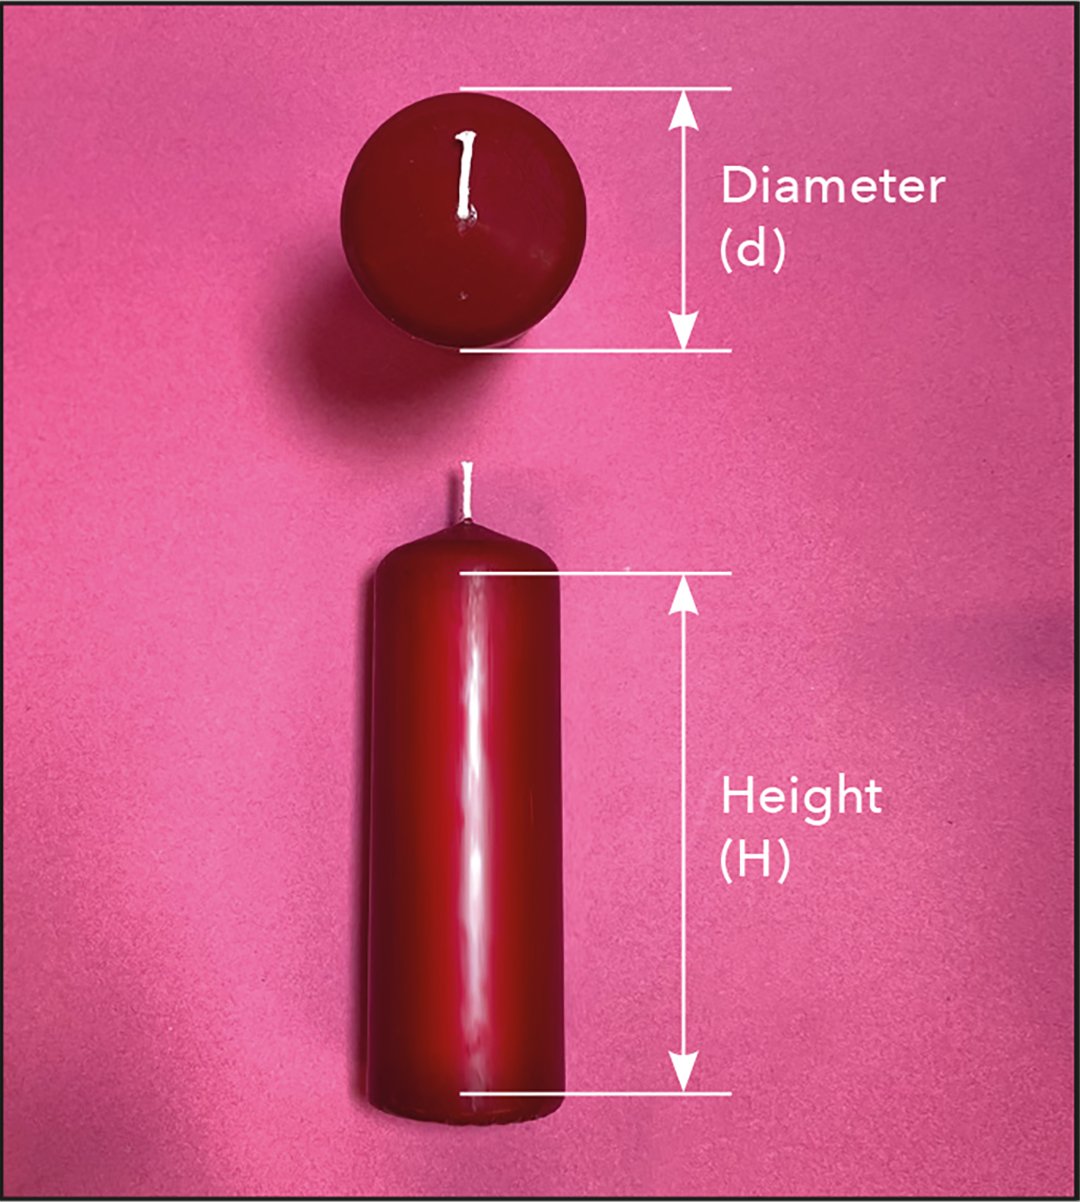 Two pillar candles, one stood up and the other lying on its side to demonstrate diameter and height.